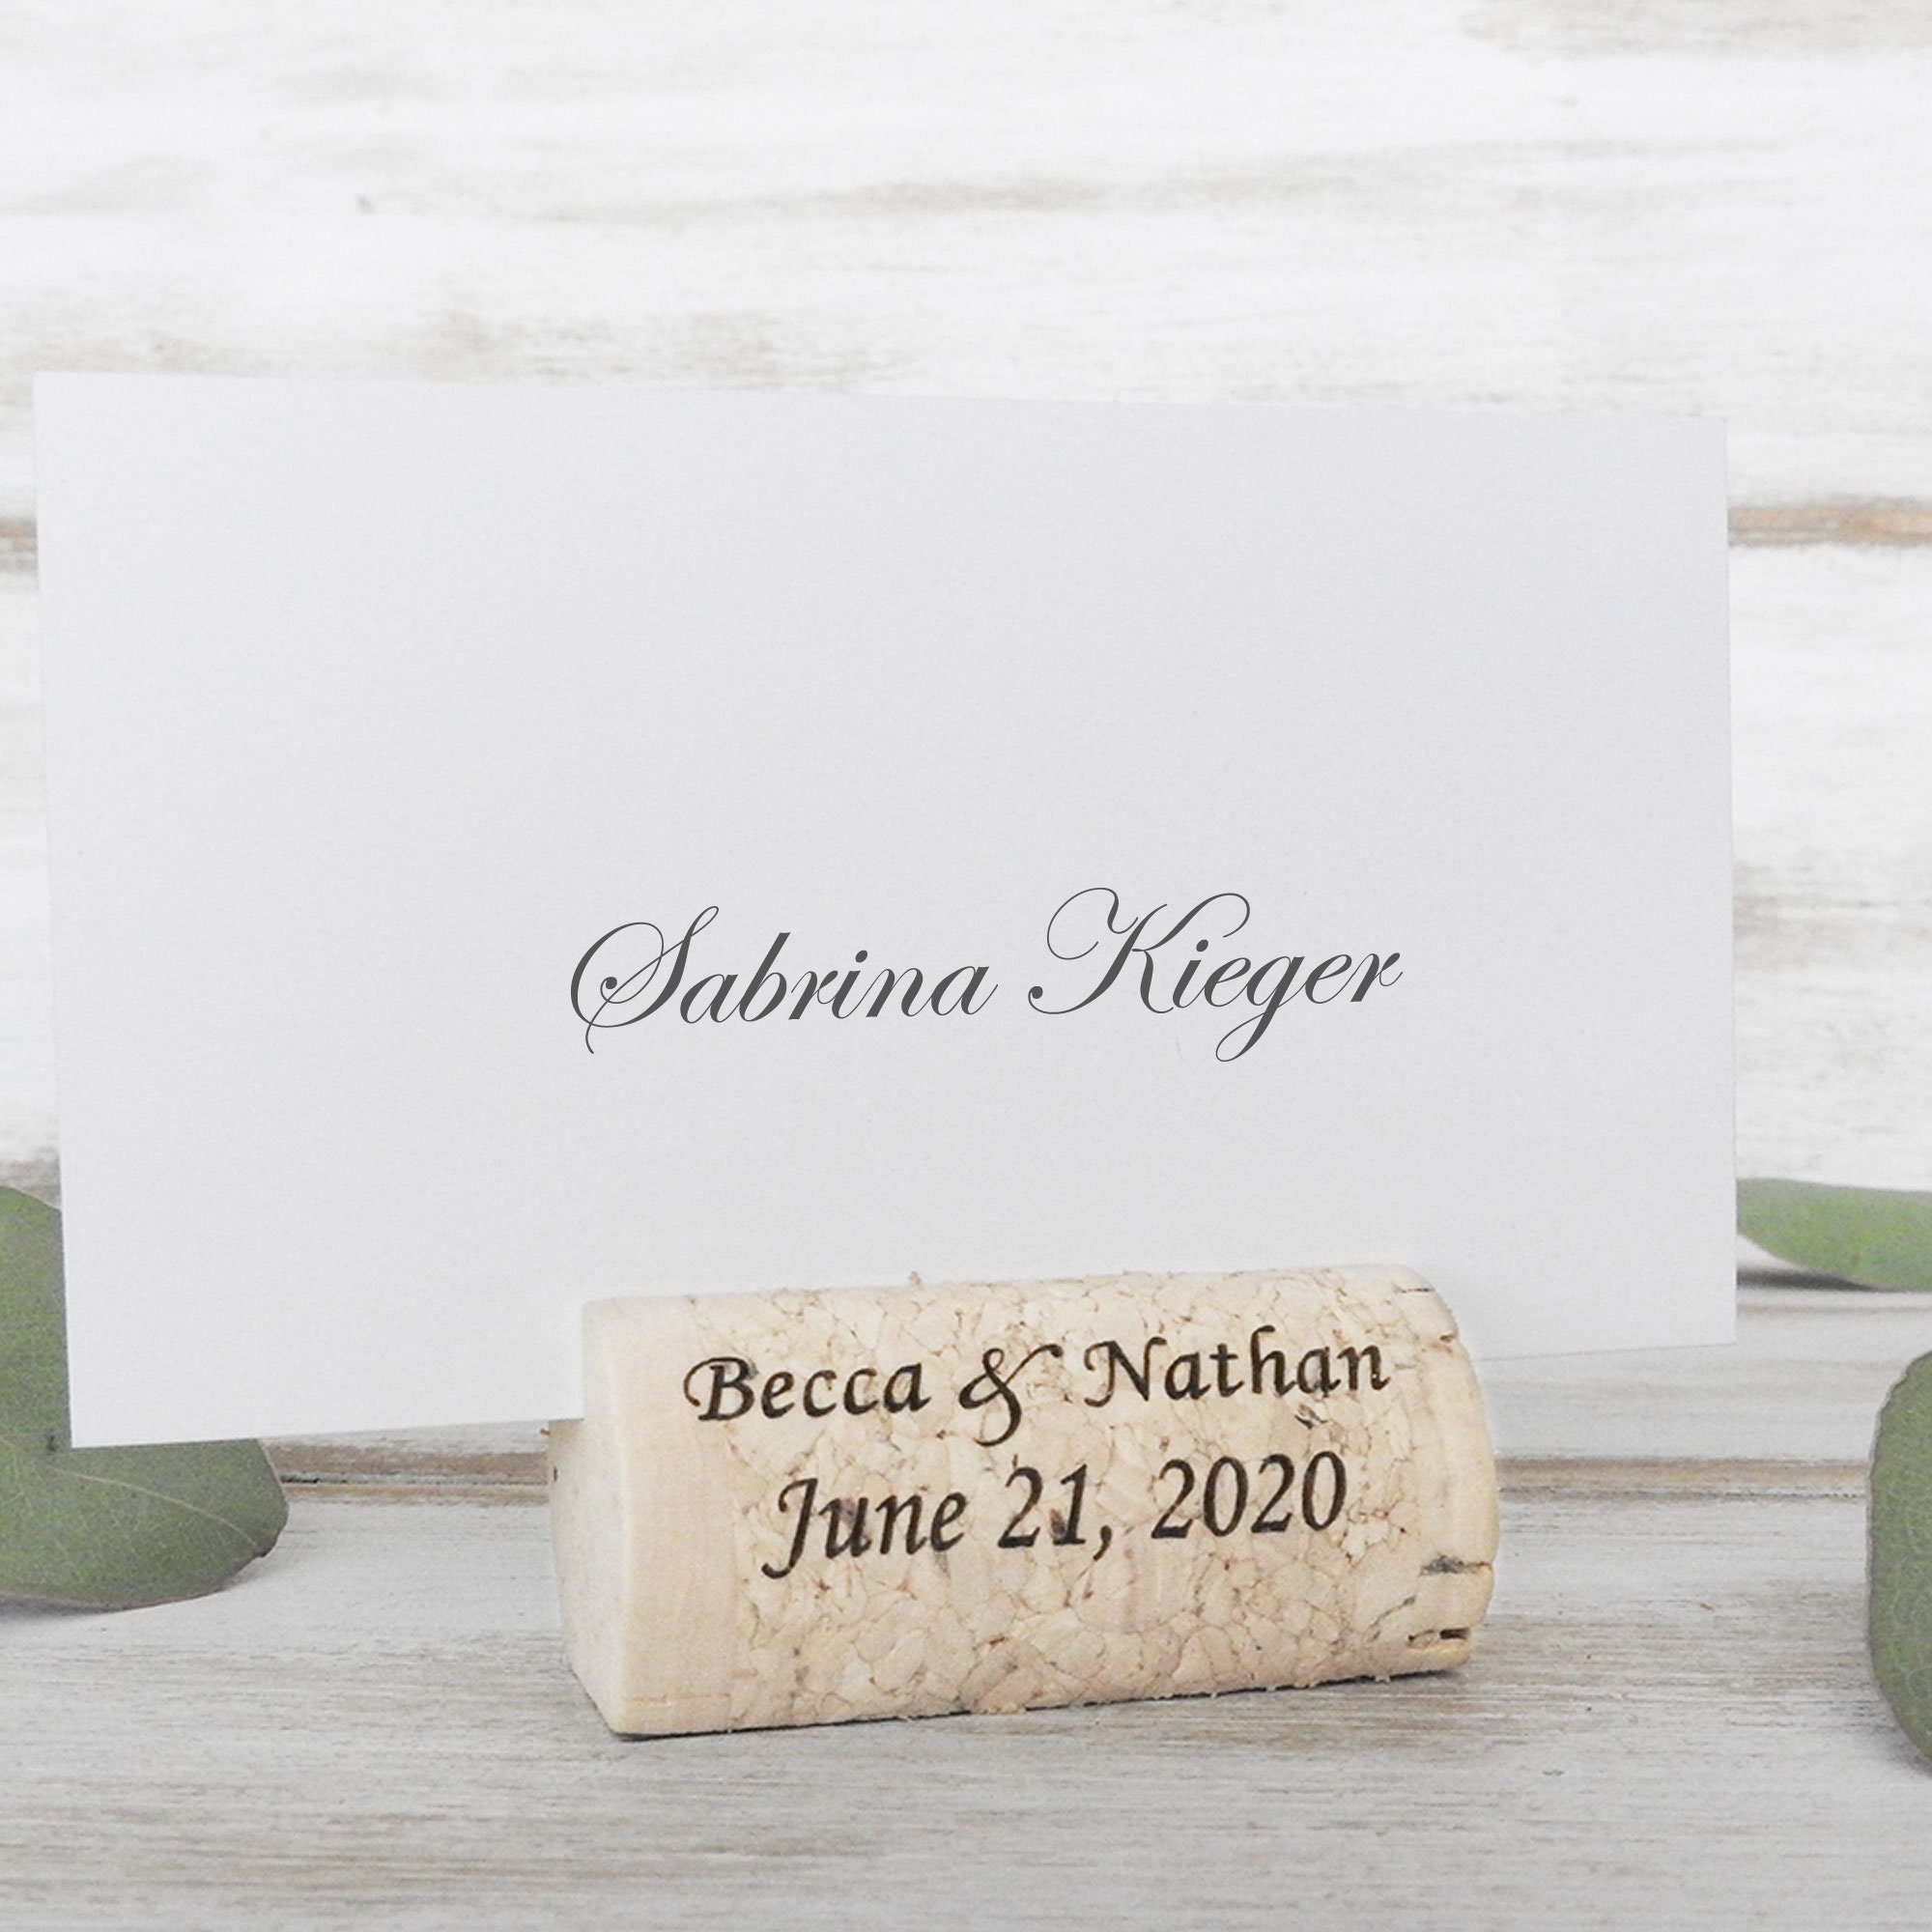 50 Natural Wine Cork Place Card Holders for Vineyard Wedding Table Setting Guest 